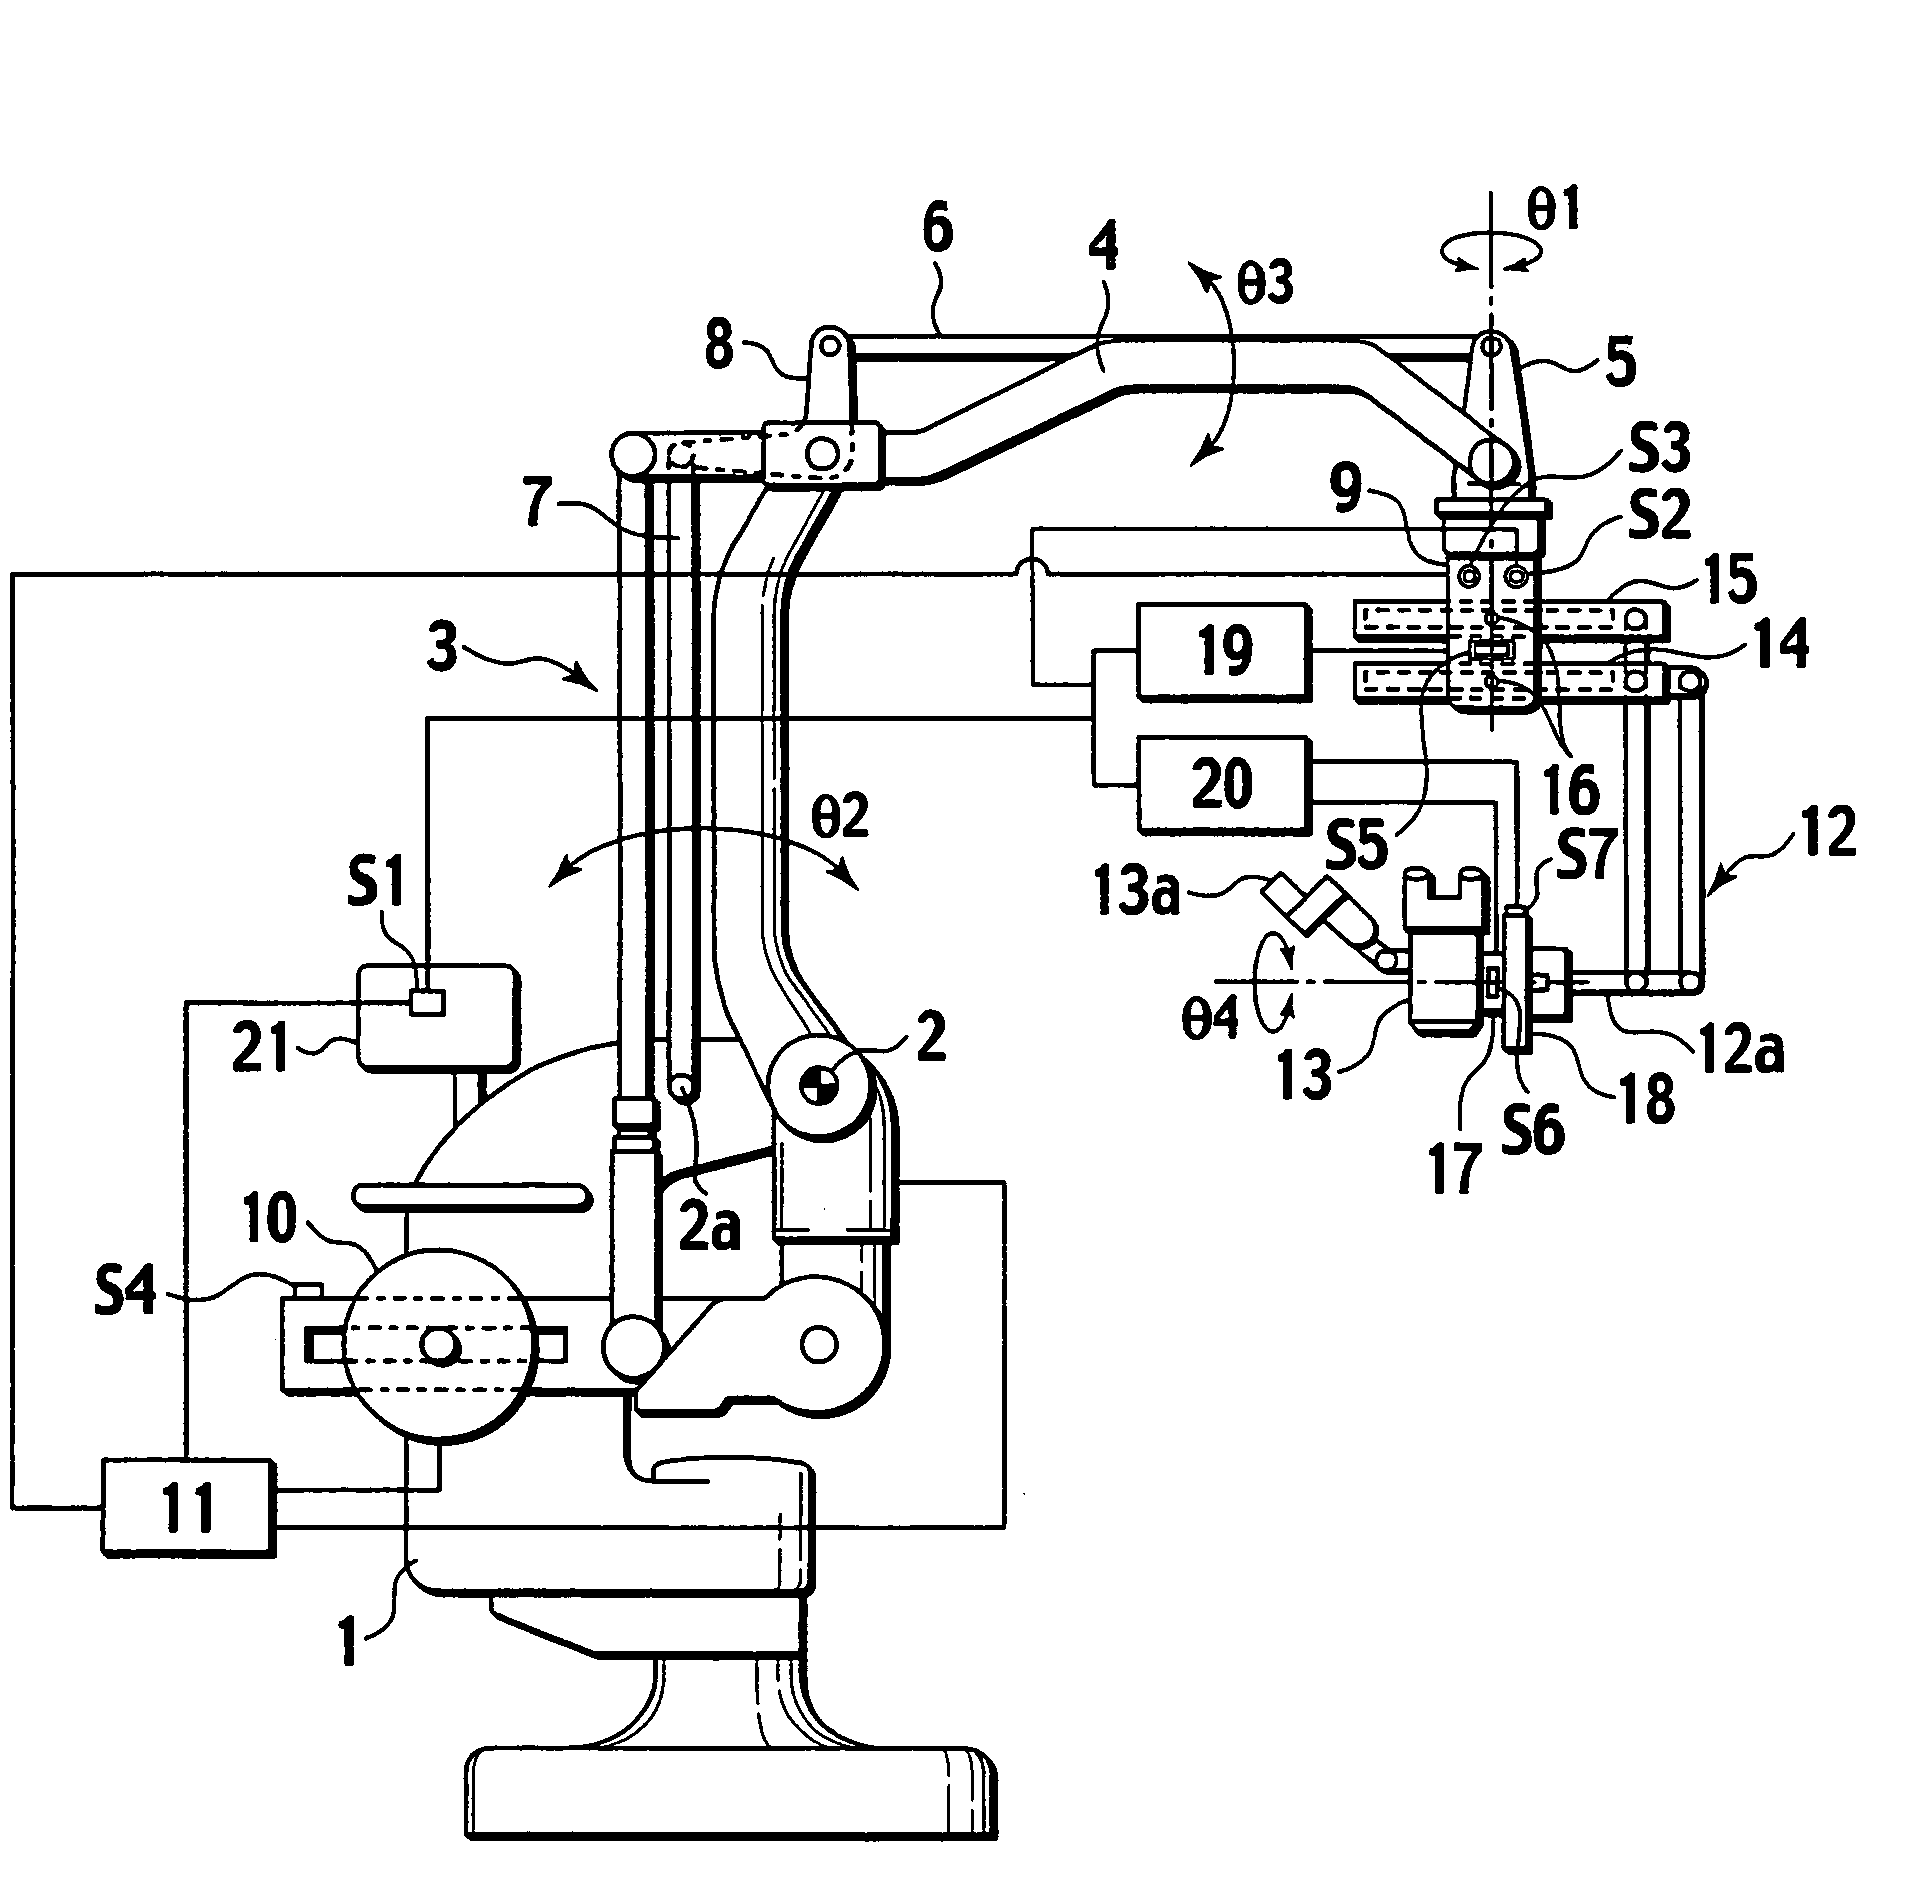 Weight balancing mechanism for operation microscope stand